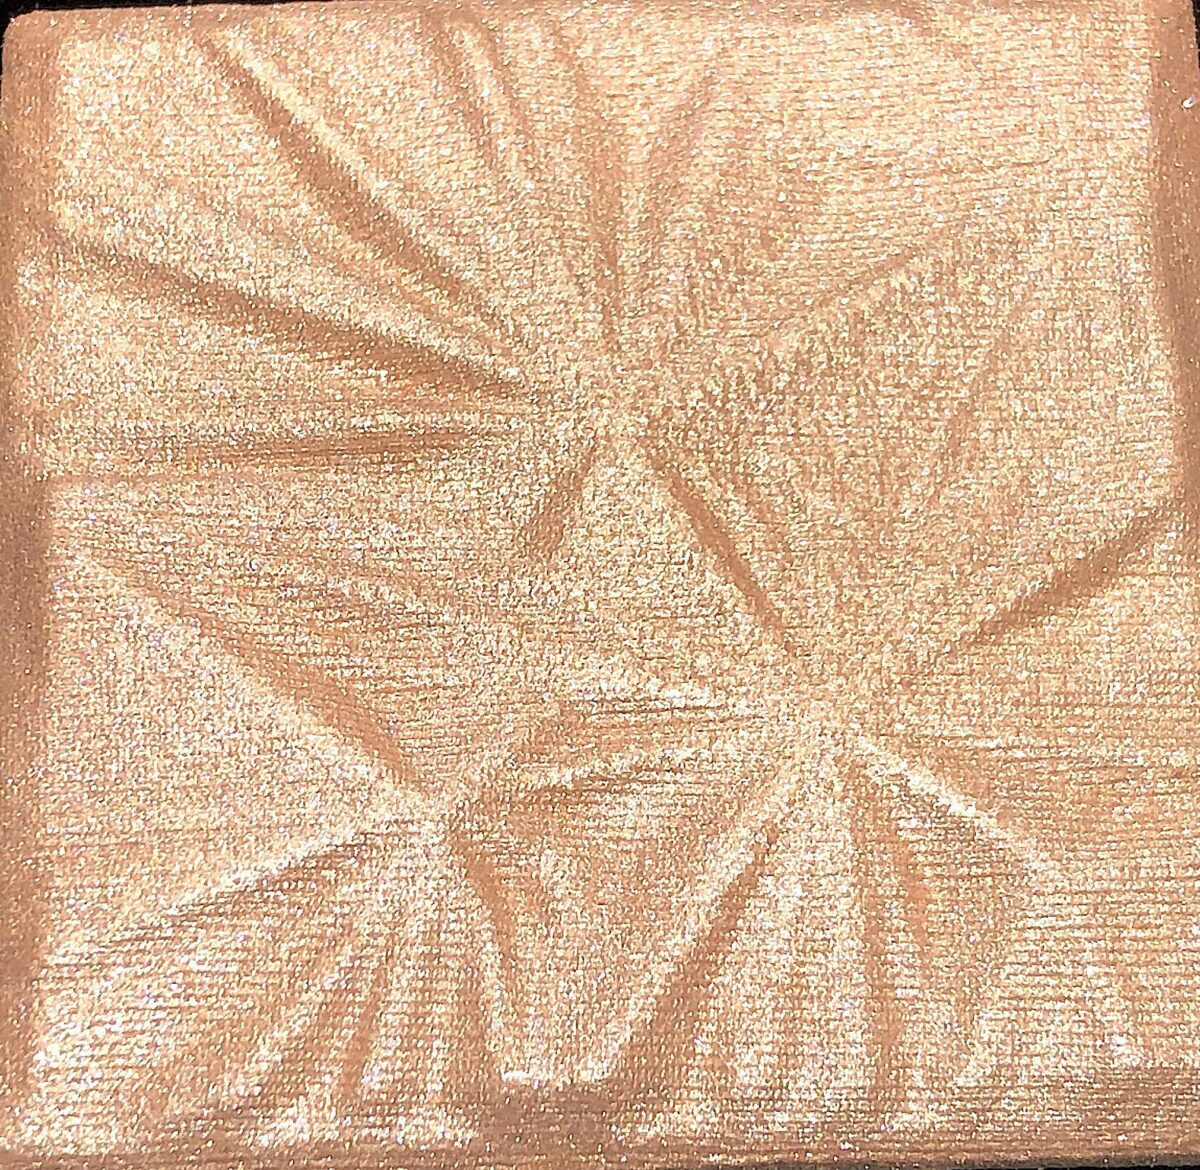 THE BOBBI BROWN LUXE ILLUMINATING HIGHLIGHTER IN THE SHADE GOLDEN HOUR